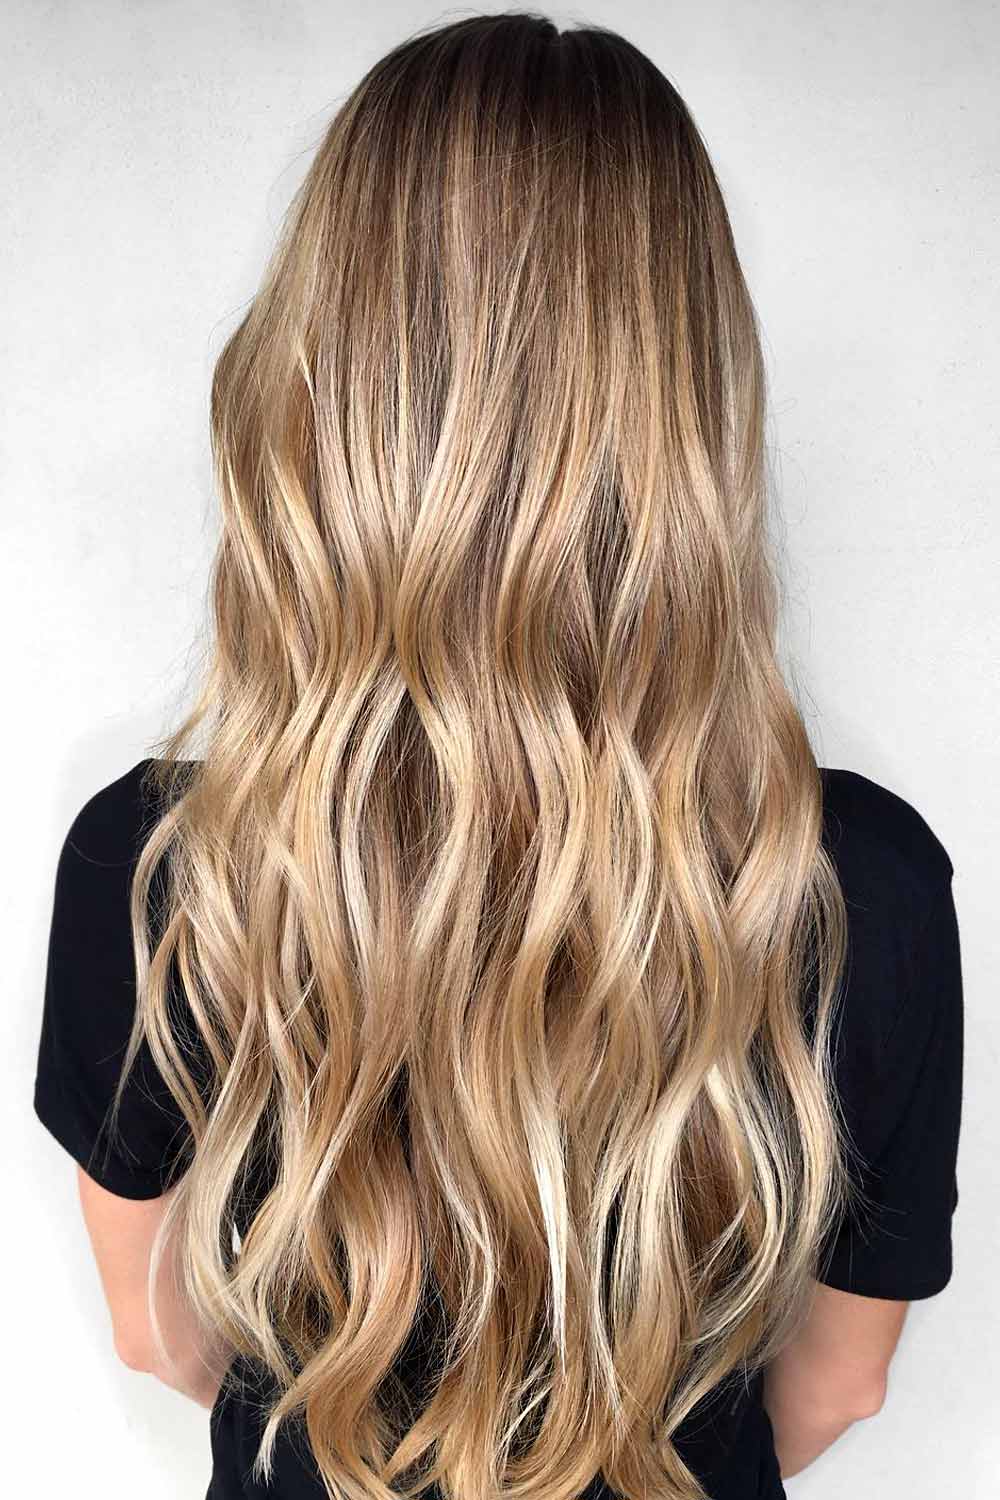 Dirty Blonde Ombre Haircut With Long Layers #dirtyblondehair #dirtyblonde #blondehair #blonde